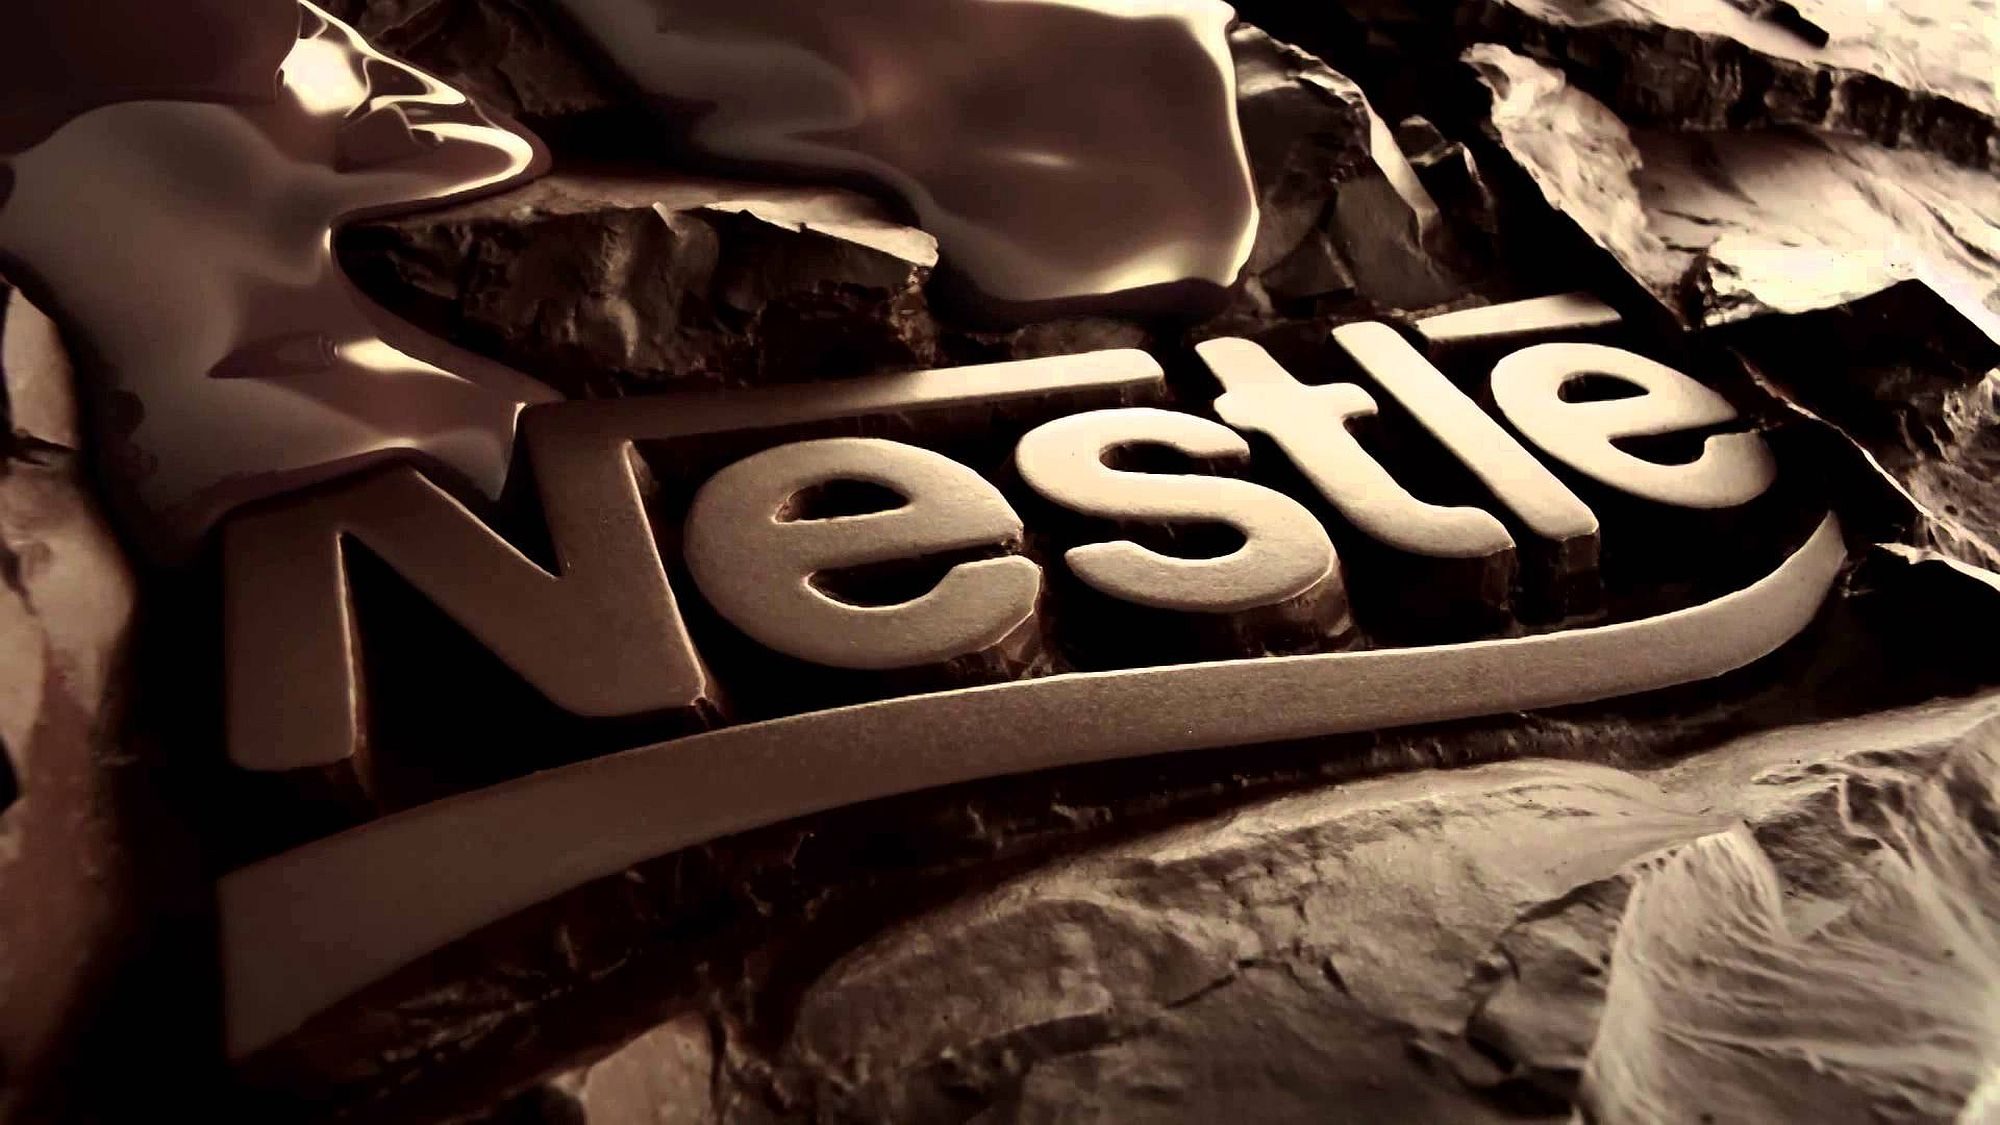 Nestlé being accused in Brazil of not inspecting working conditions of its distributors